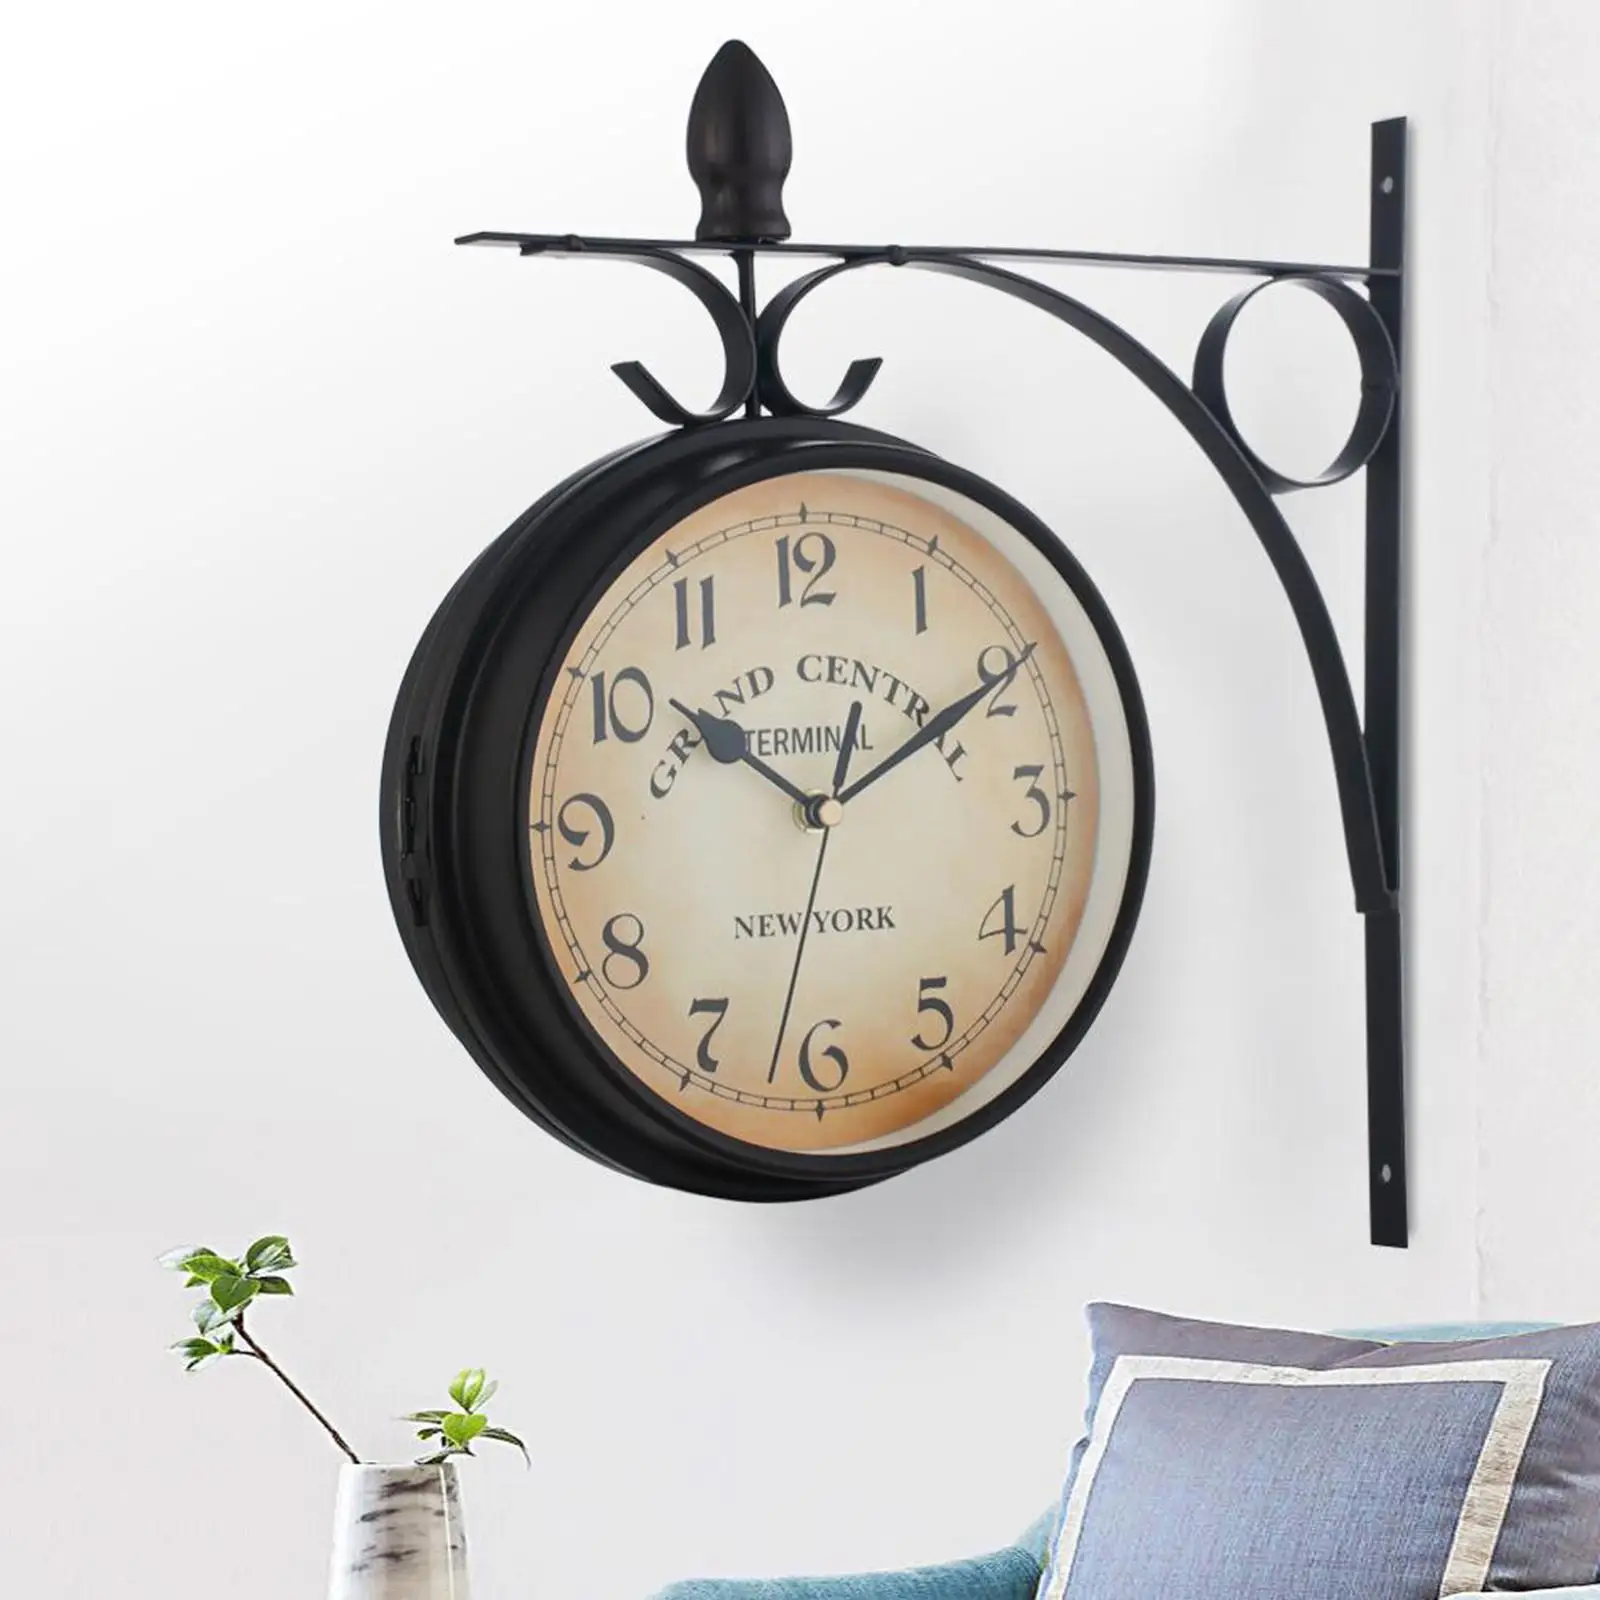 Double Sided Garden Outdoor Wall Clock Iron Hanging Wall Mount Clock Vintage